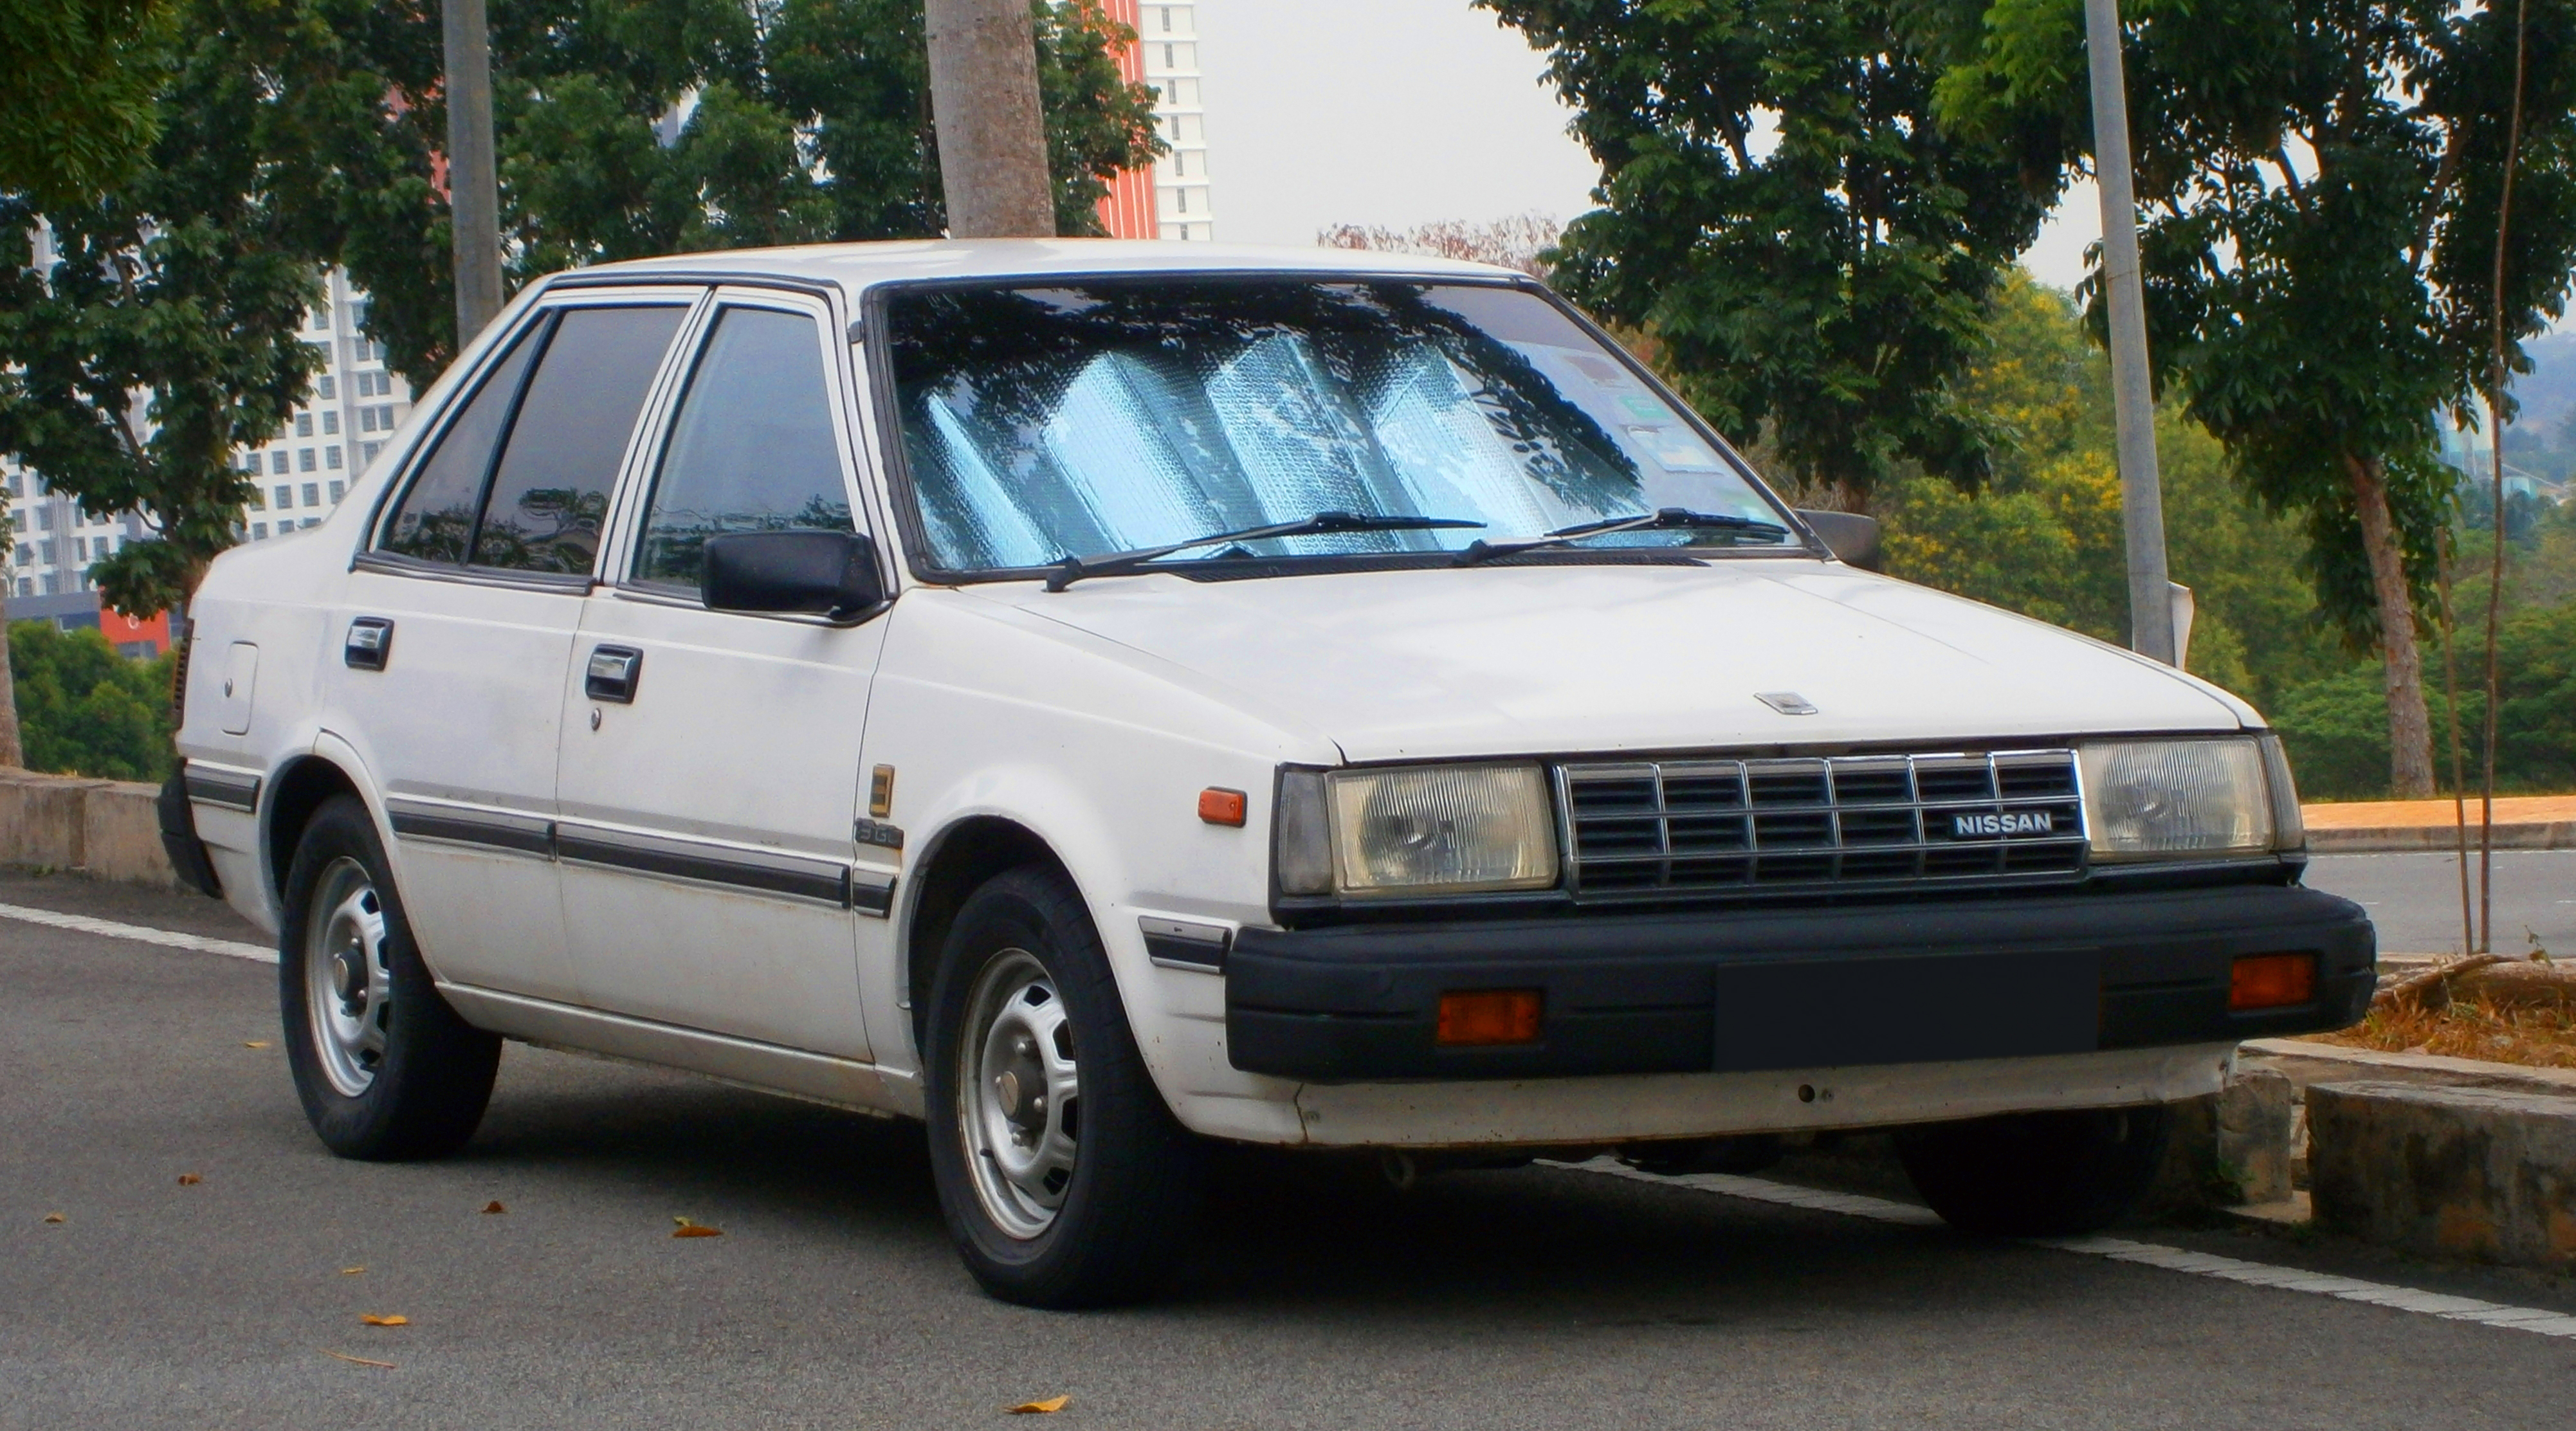 The Datsun 120Y, or more commonly known as the Nissan Sunny. Source